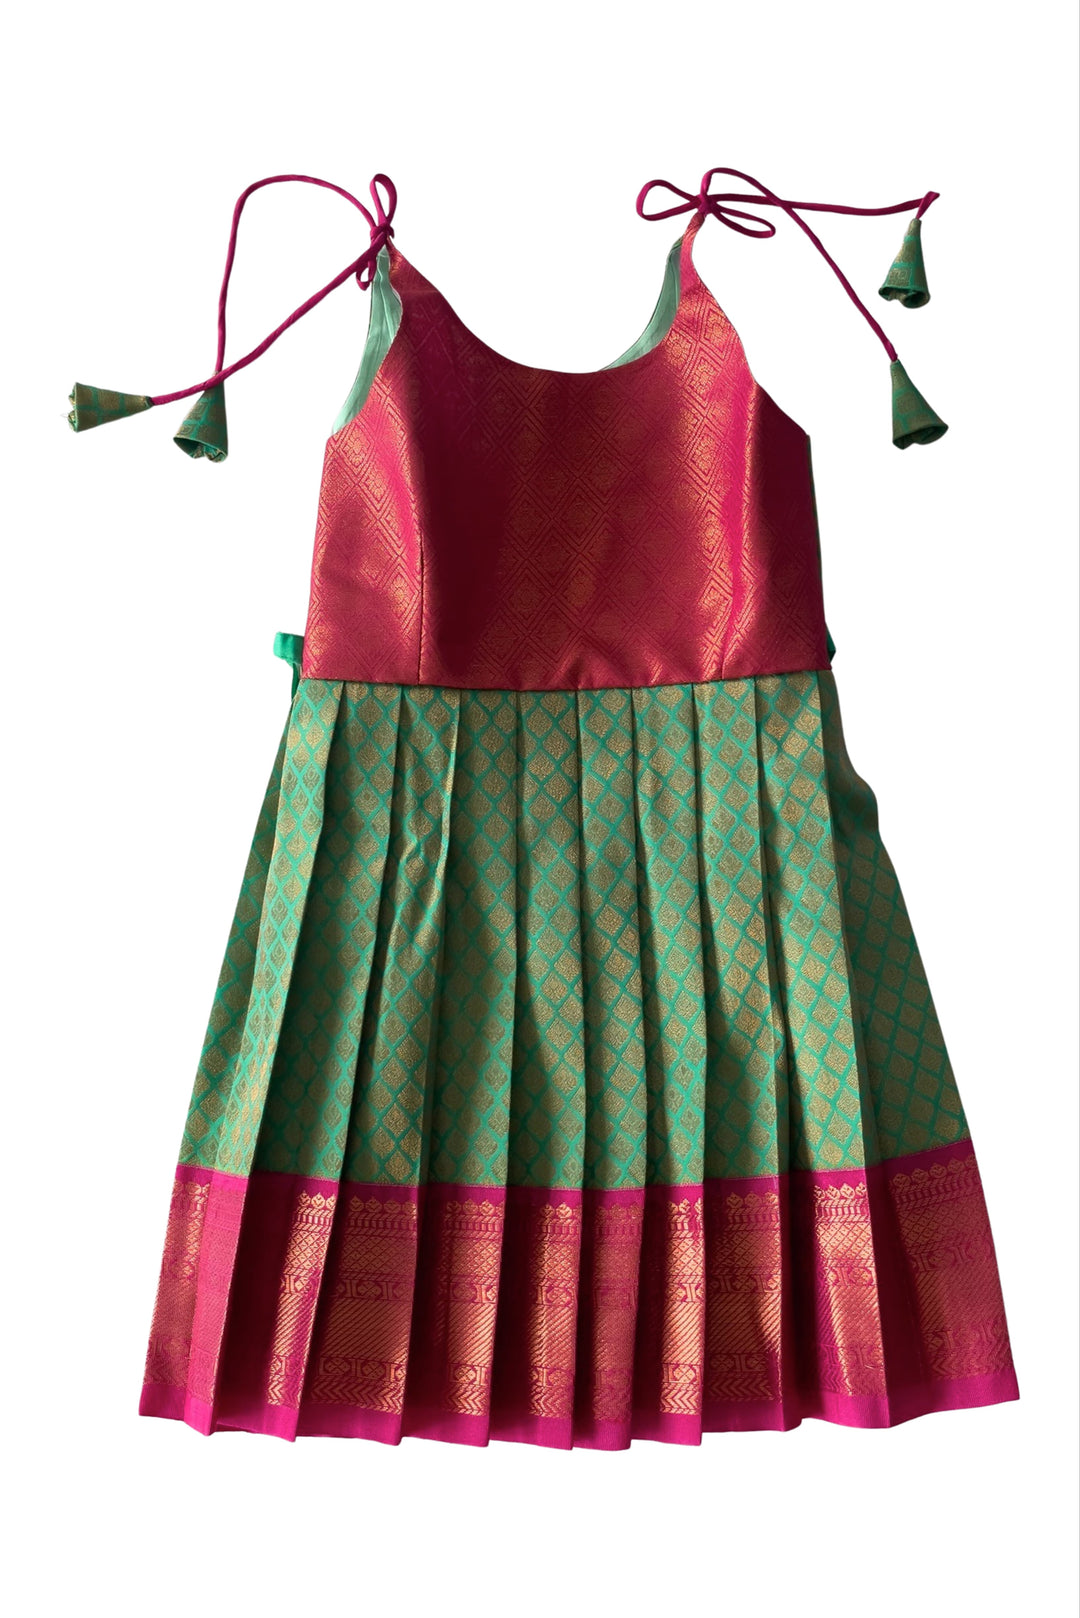 The Nesavu Tie-up Frock Chic Magenta and Green Tie-Up Silk Frock for Girls - Traditional Elegance Nesavu 14 (6M) / Green / Style 3 T304C-14 Girls Magenta & Green Silk Frock | Festive Tie-Up Design | Classic Cultural Attire | The Nesavu